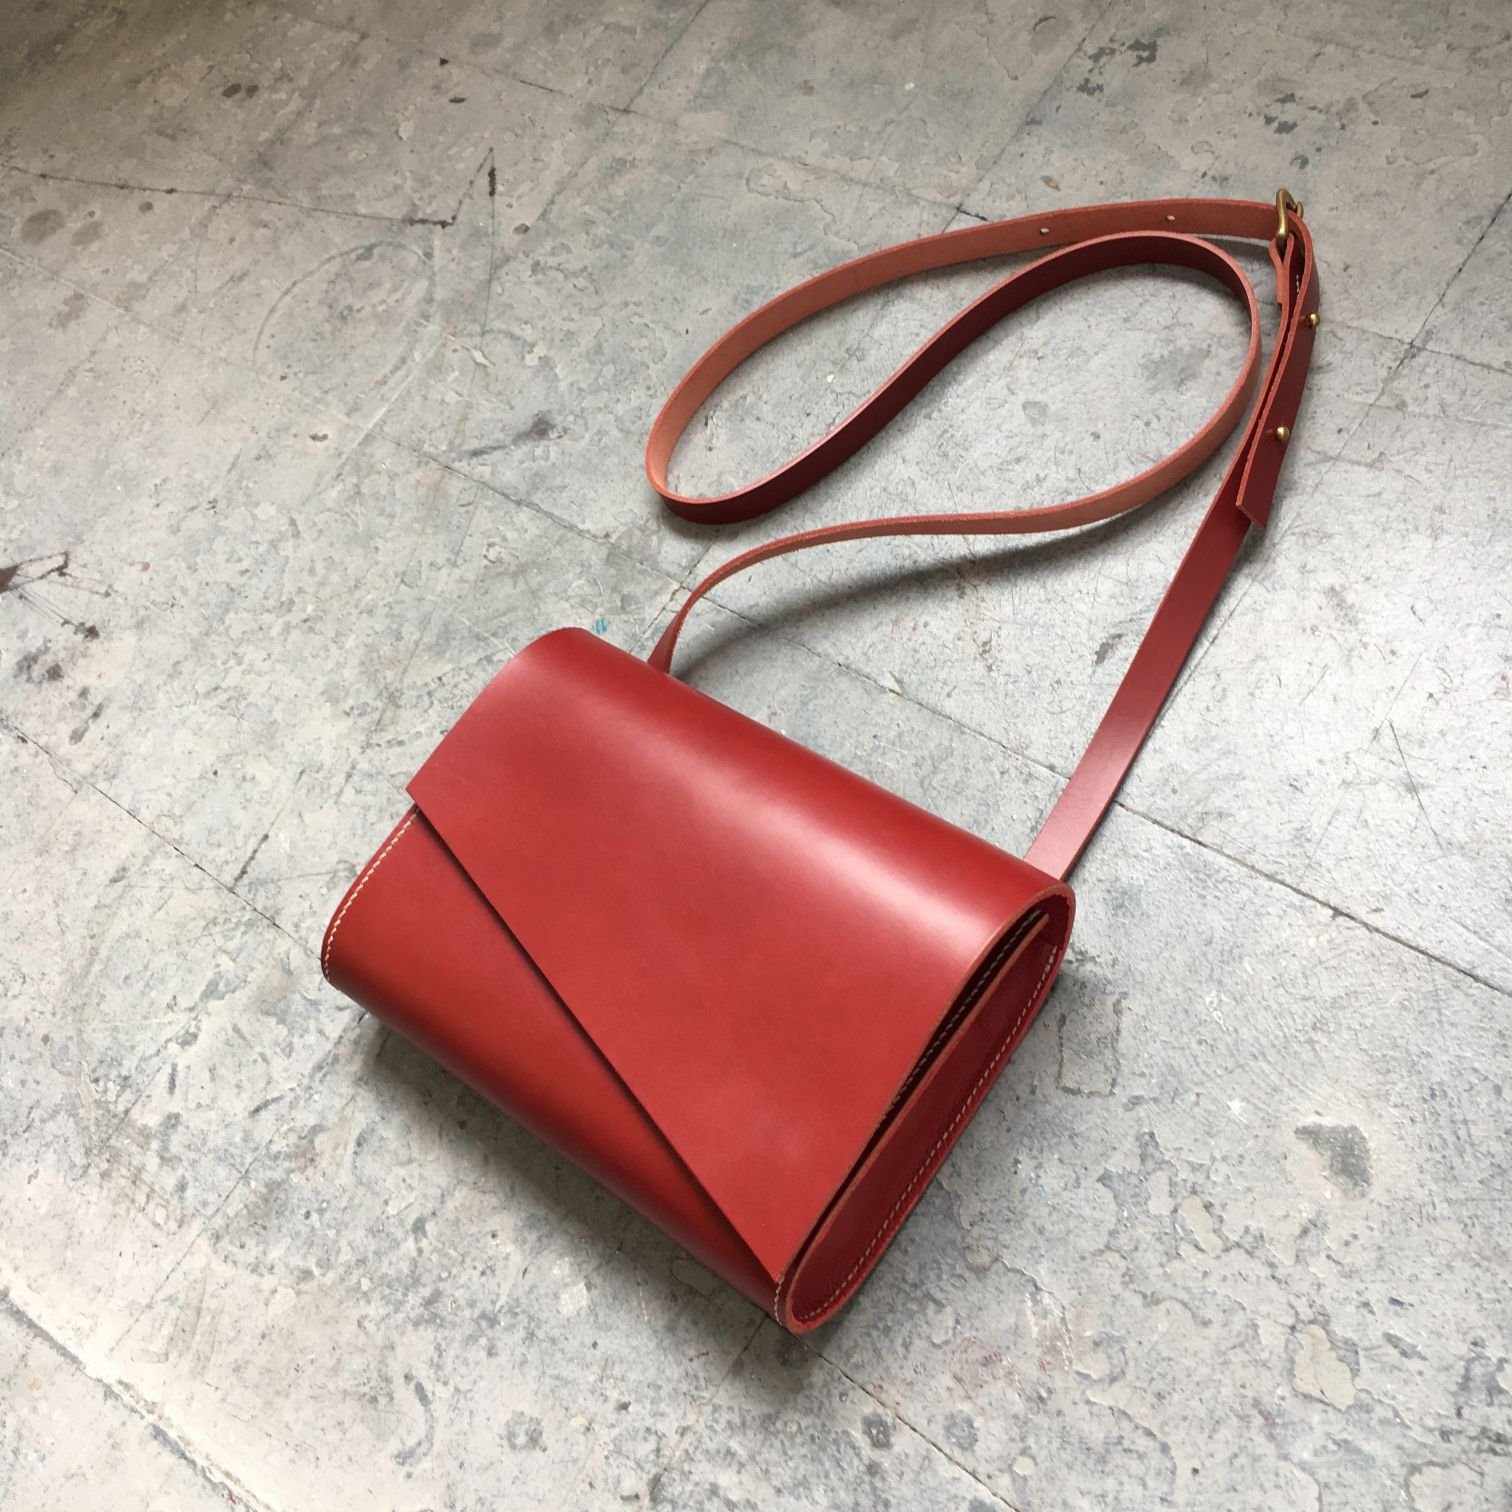 CARV sustainable leather bag in red handmade in the UK